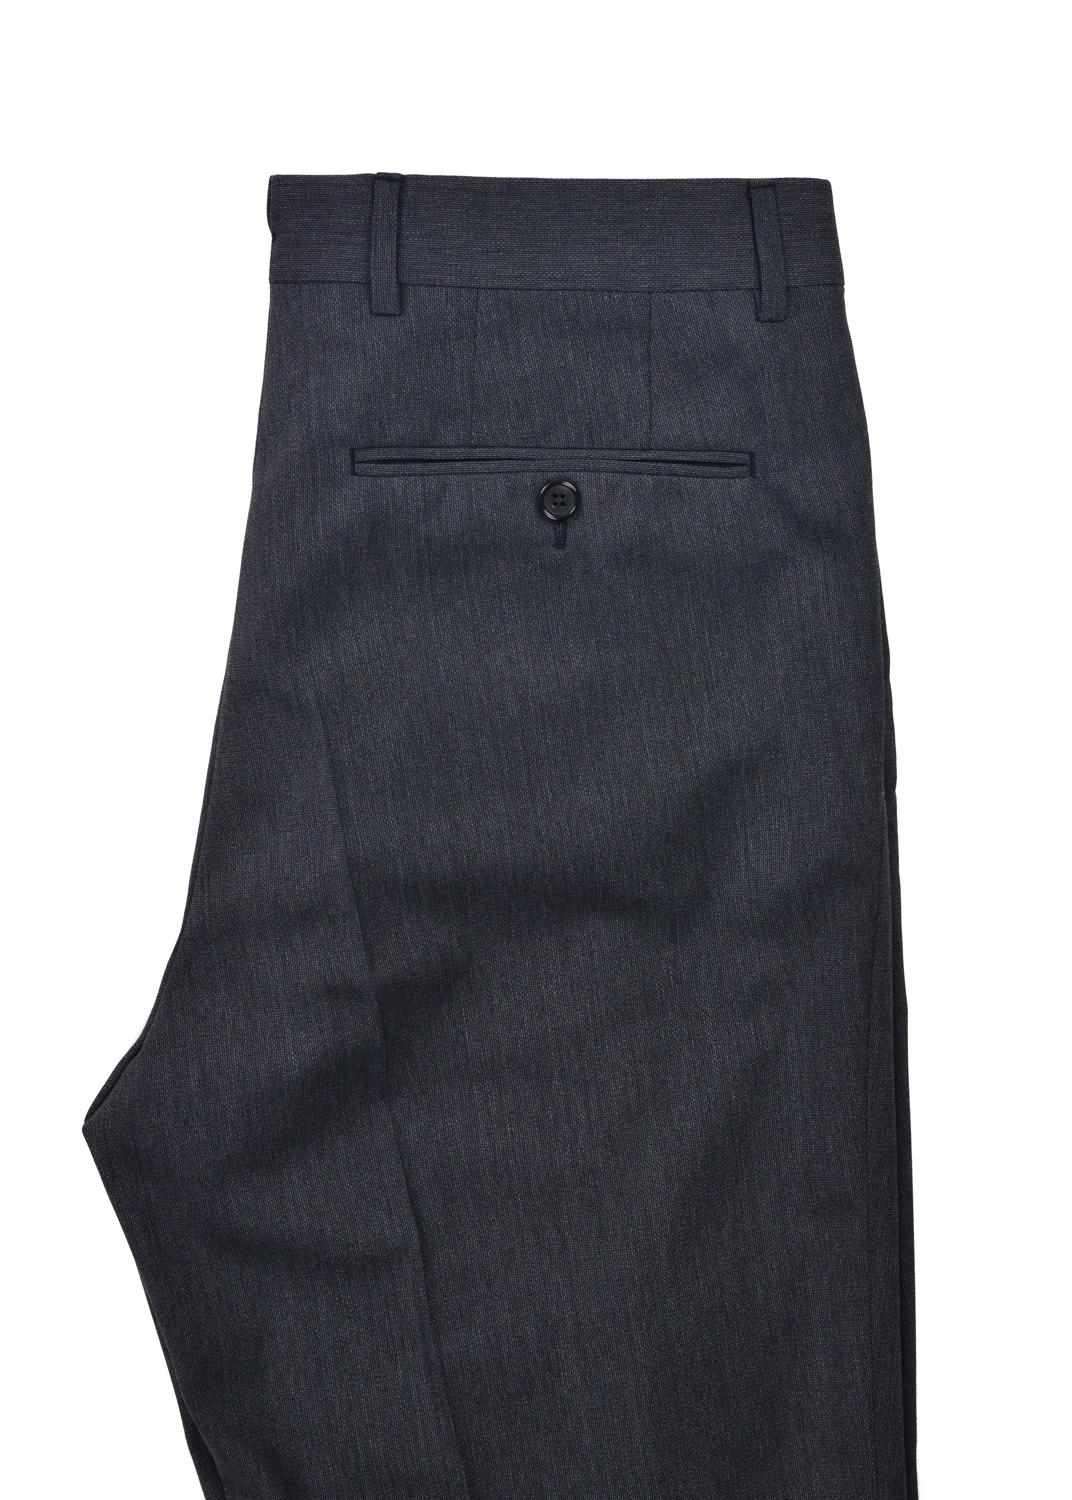 Tom Ford Men's Dark Grey Wool Twill Pleated Slacks In New Condition For Sale In Brooklyn, NY